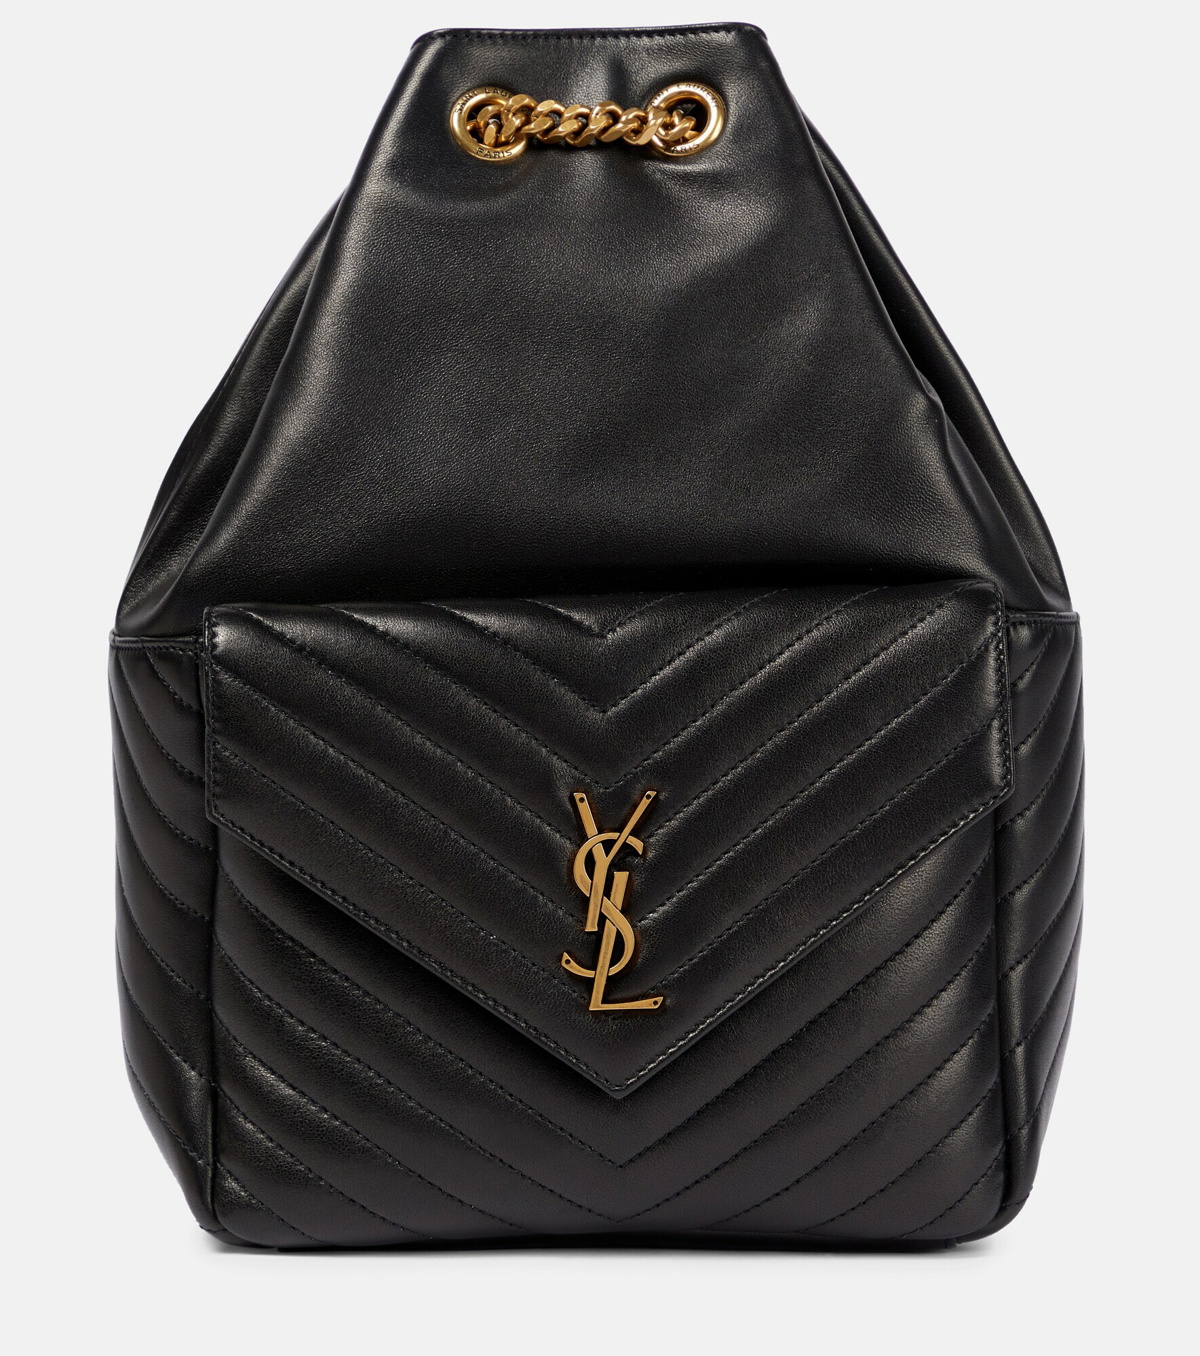 Saint Laurent Black Quilted Leather Loulou Backpack